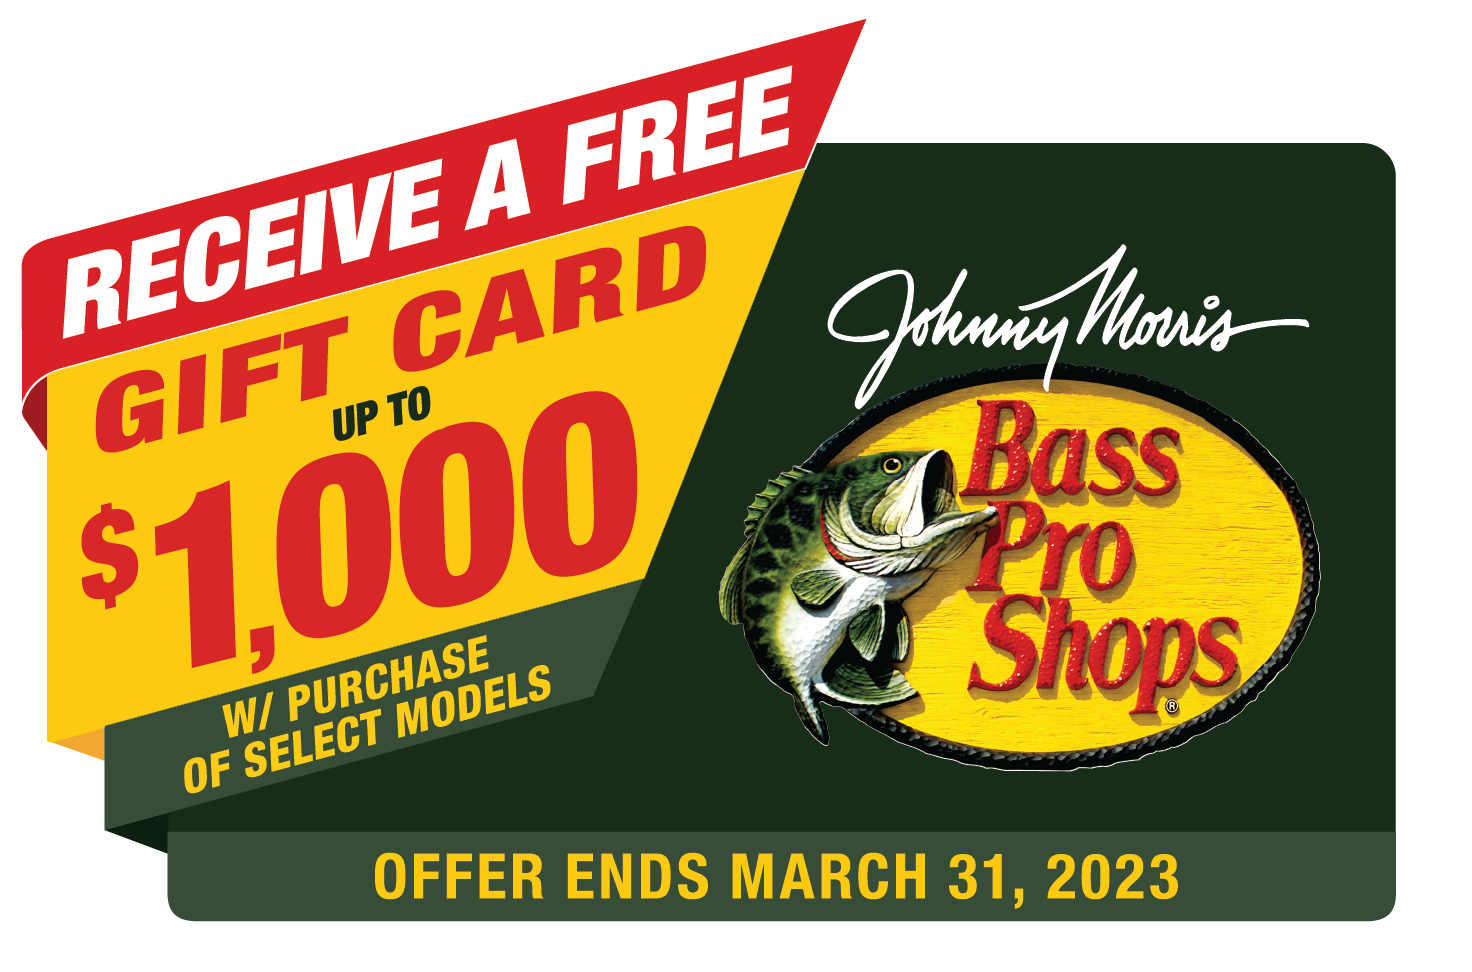 Free Gift Card up to $1,000 with Purchase